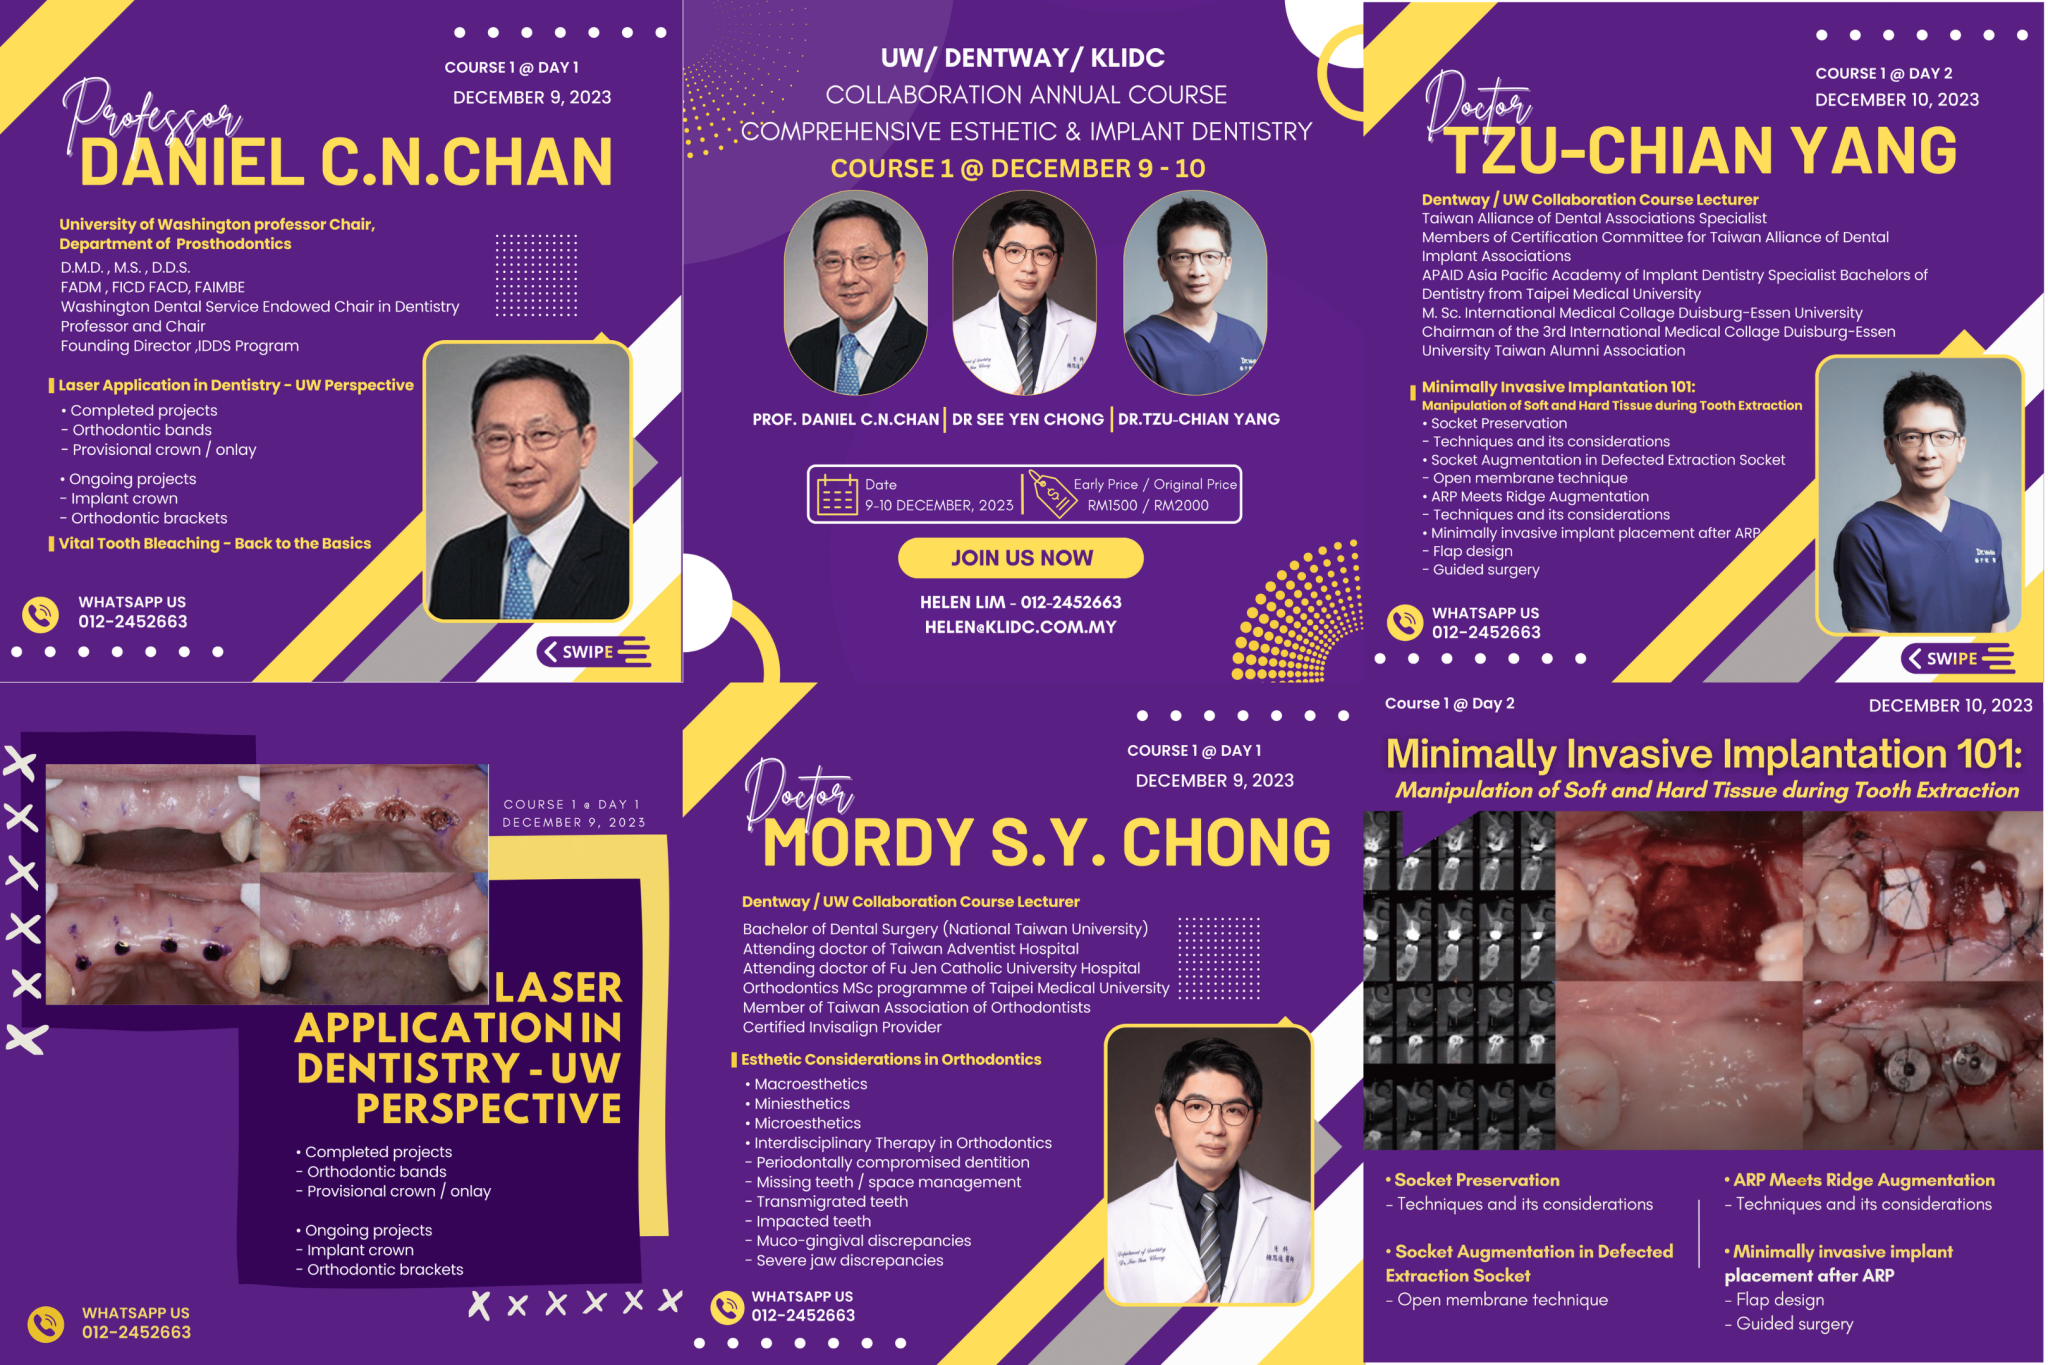 2023-2024 UW / Dentway / KLIDC ACADEMY Collaboration Annual Course Comprehensive Esthetic & Implant Dentistry